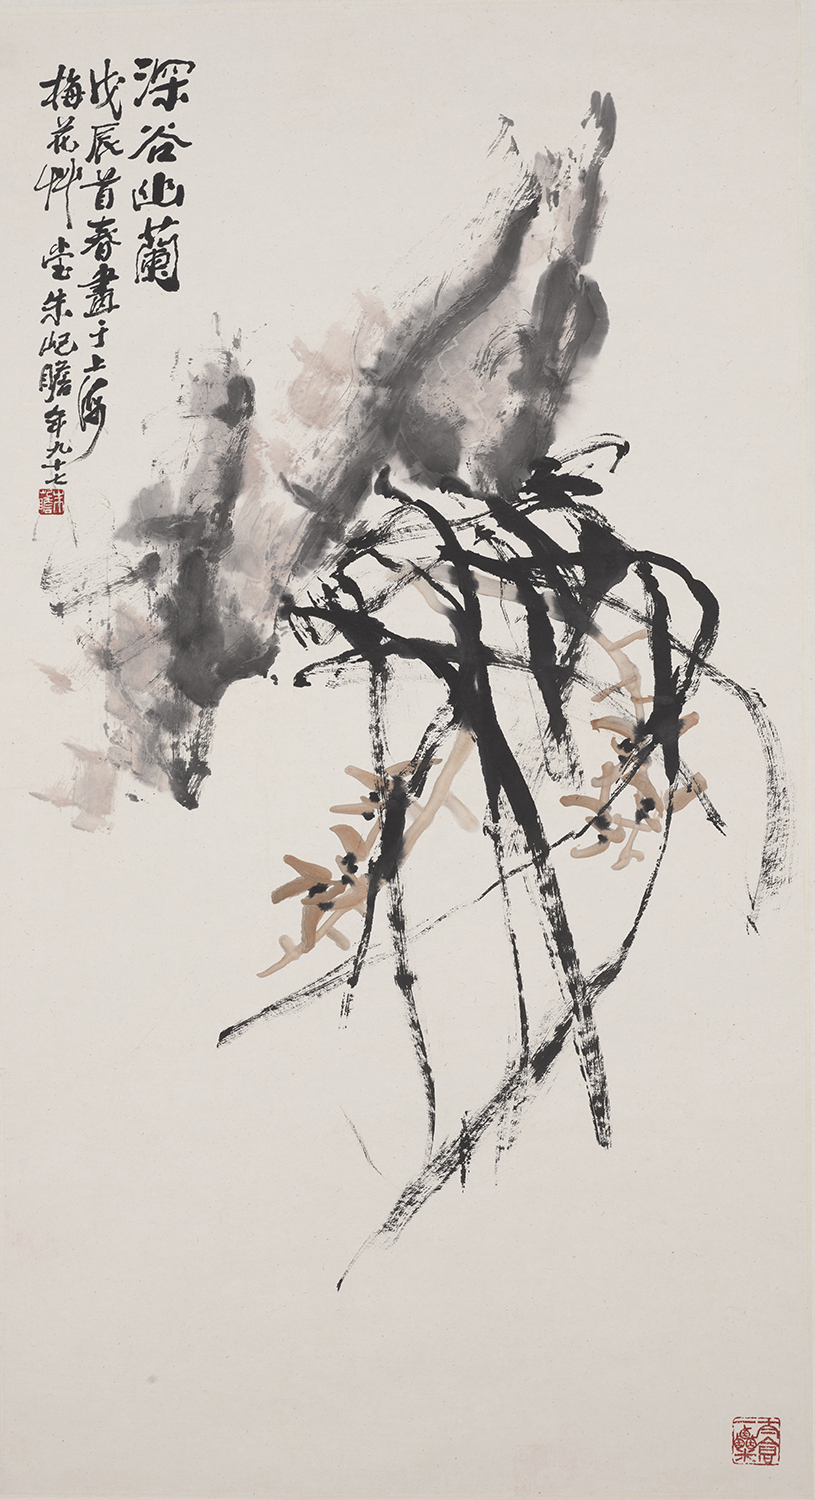 Zhu Qizhan (1892 – 1996)<br> Orchids in the deep valley